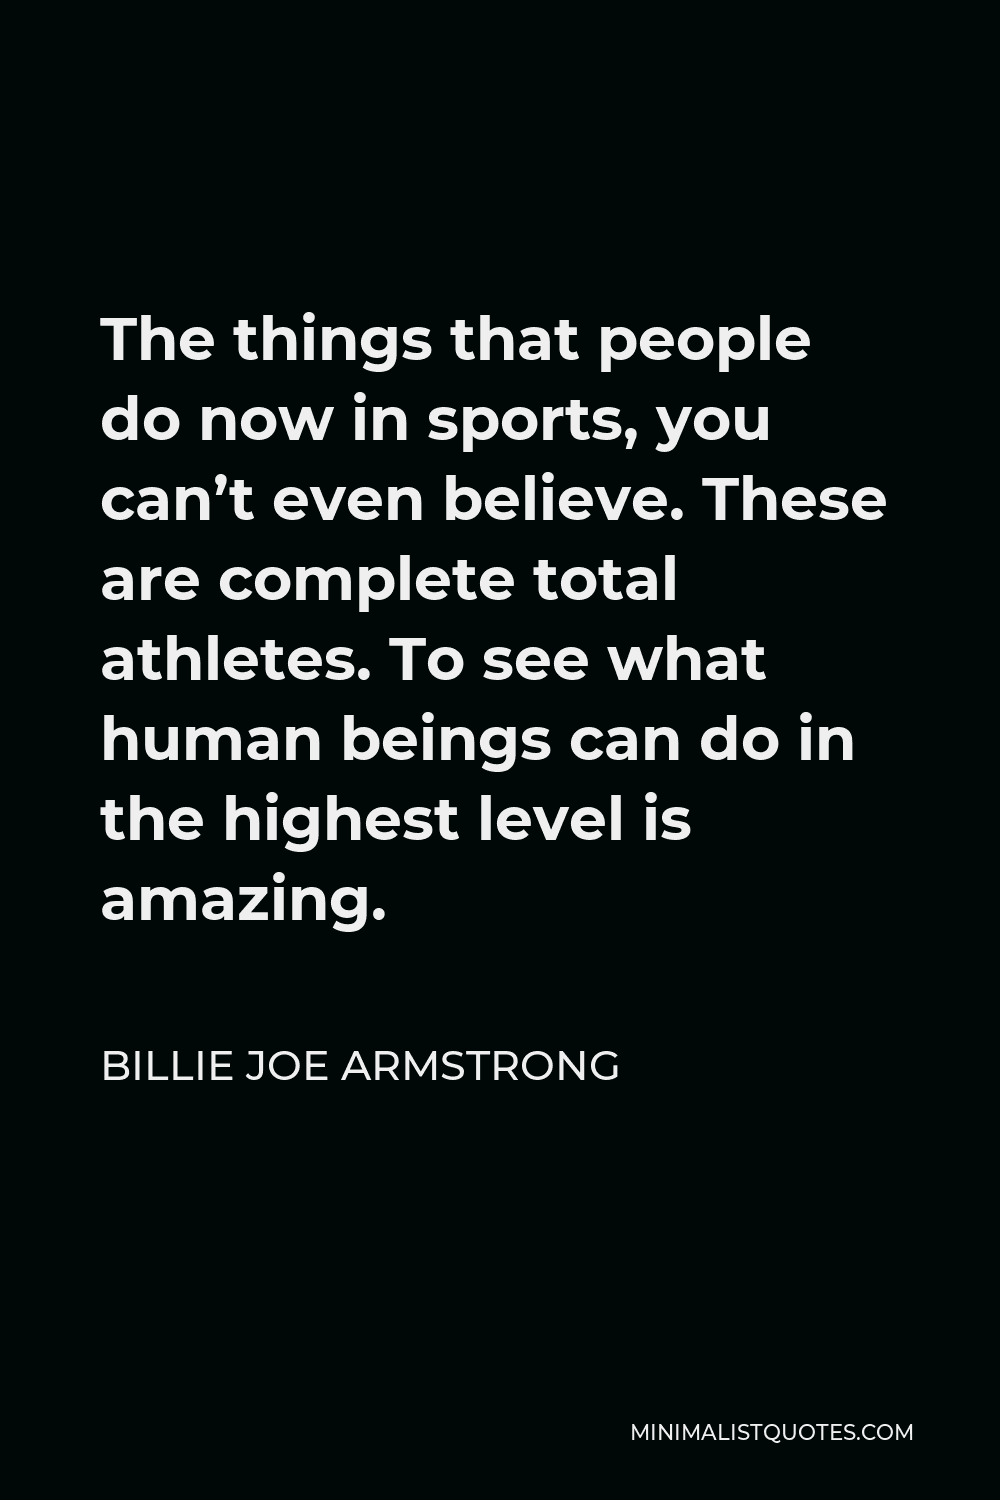 Billie Joe Armstrong Quote - The things that people do now in sports, you can’t even believe. These are complete total athletes. To see what human beings can do in the highest level is amazing.